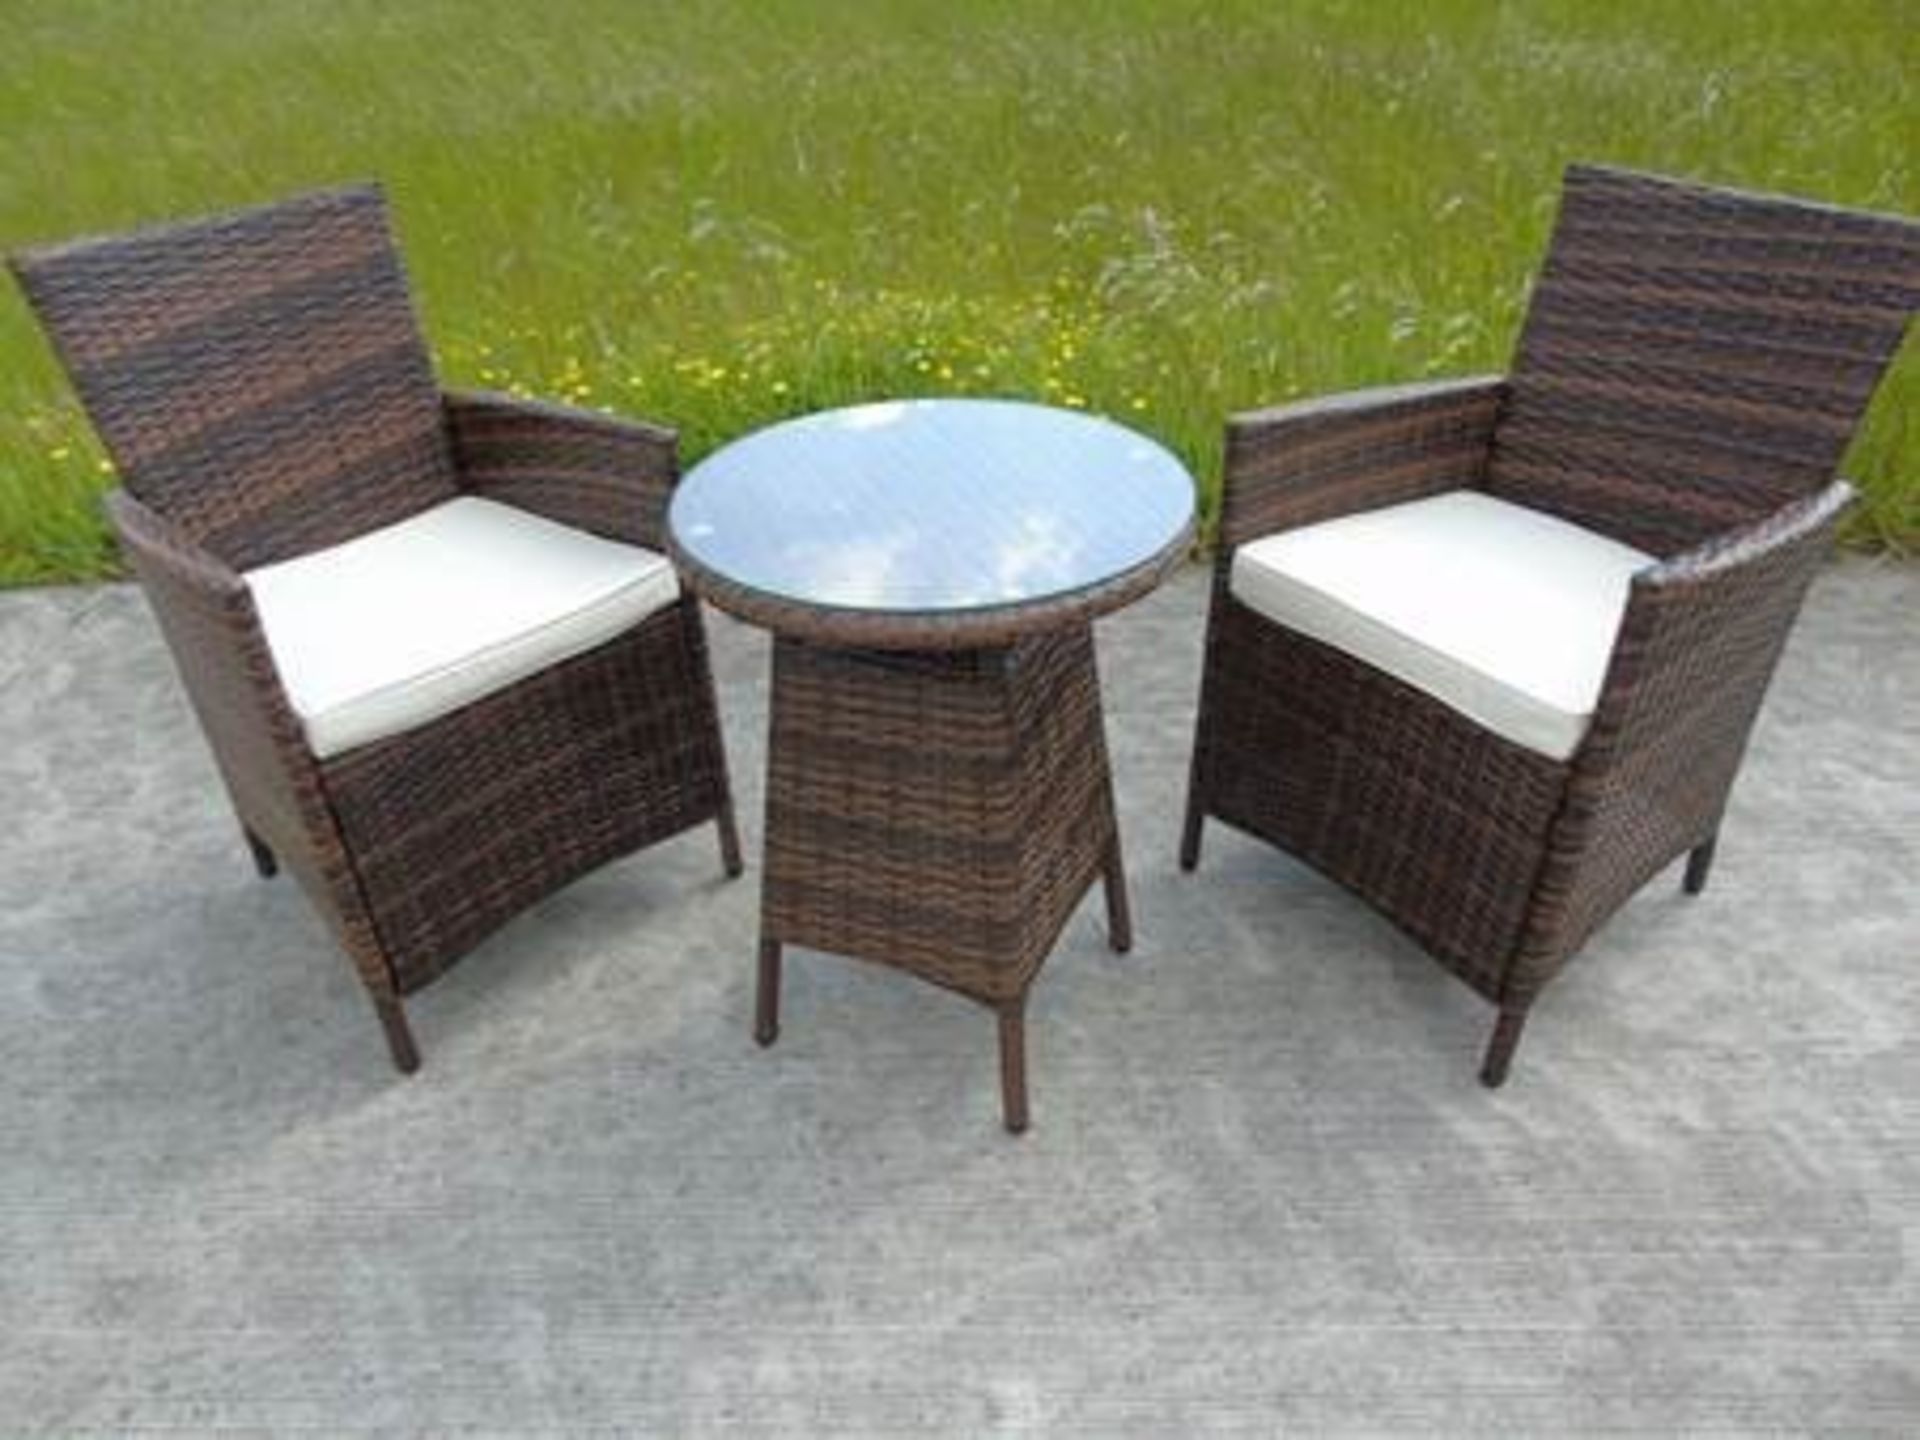 + VAT Brand New Chelsea Garden Company Two Person Dining Set - Item Is Available From Approx 8th